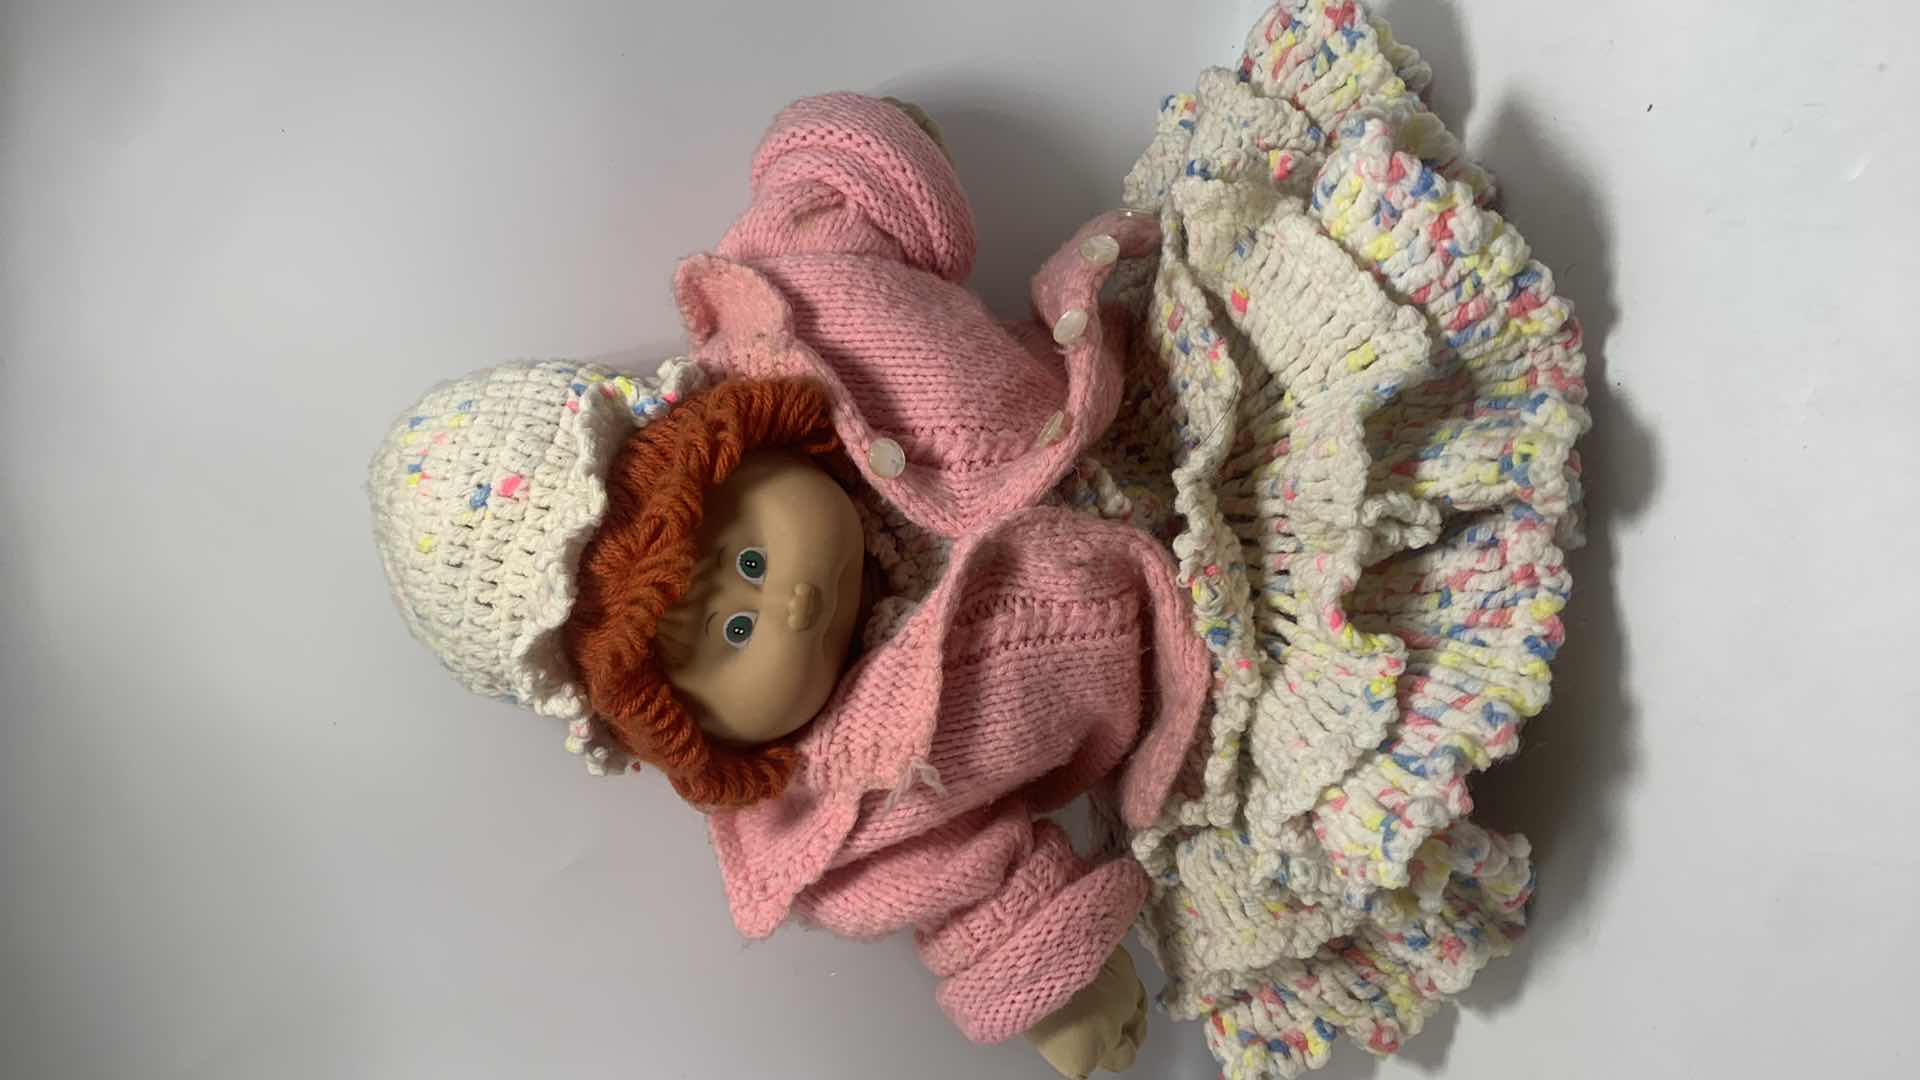 Photo 3 of RARE COLLECTIBLE CABBAGE PATCH DOLL IN CROCHETED OUTFIT, H19”